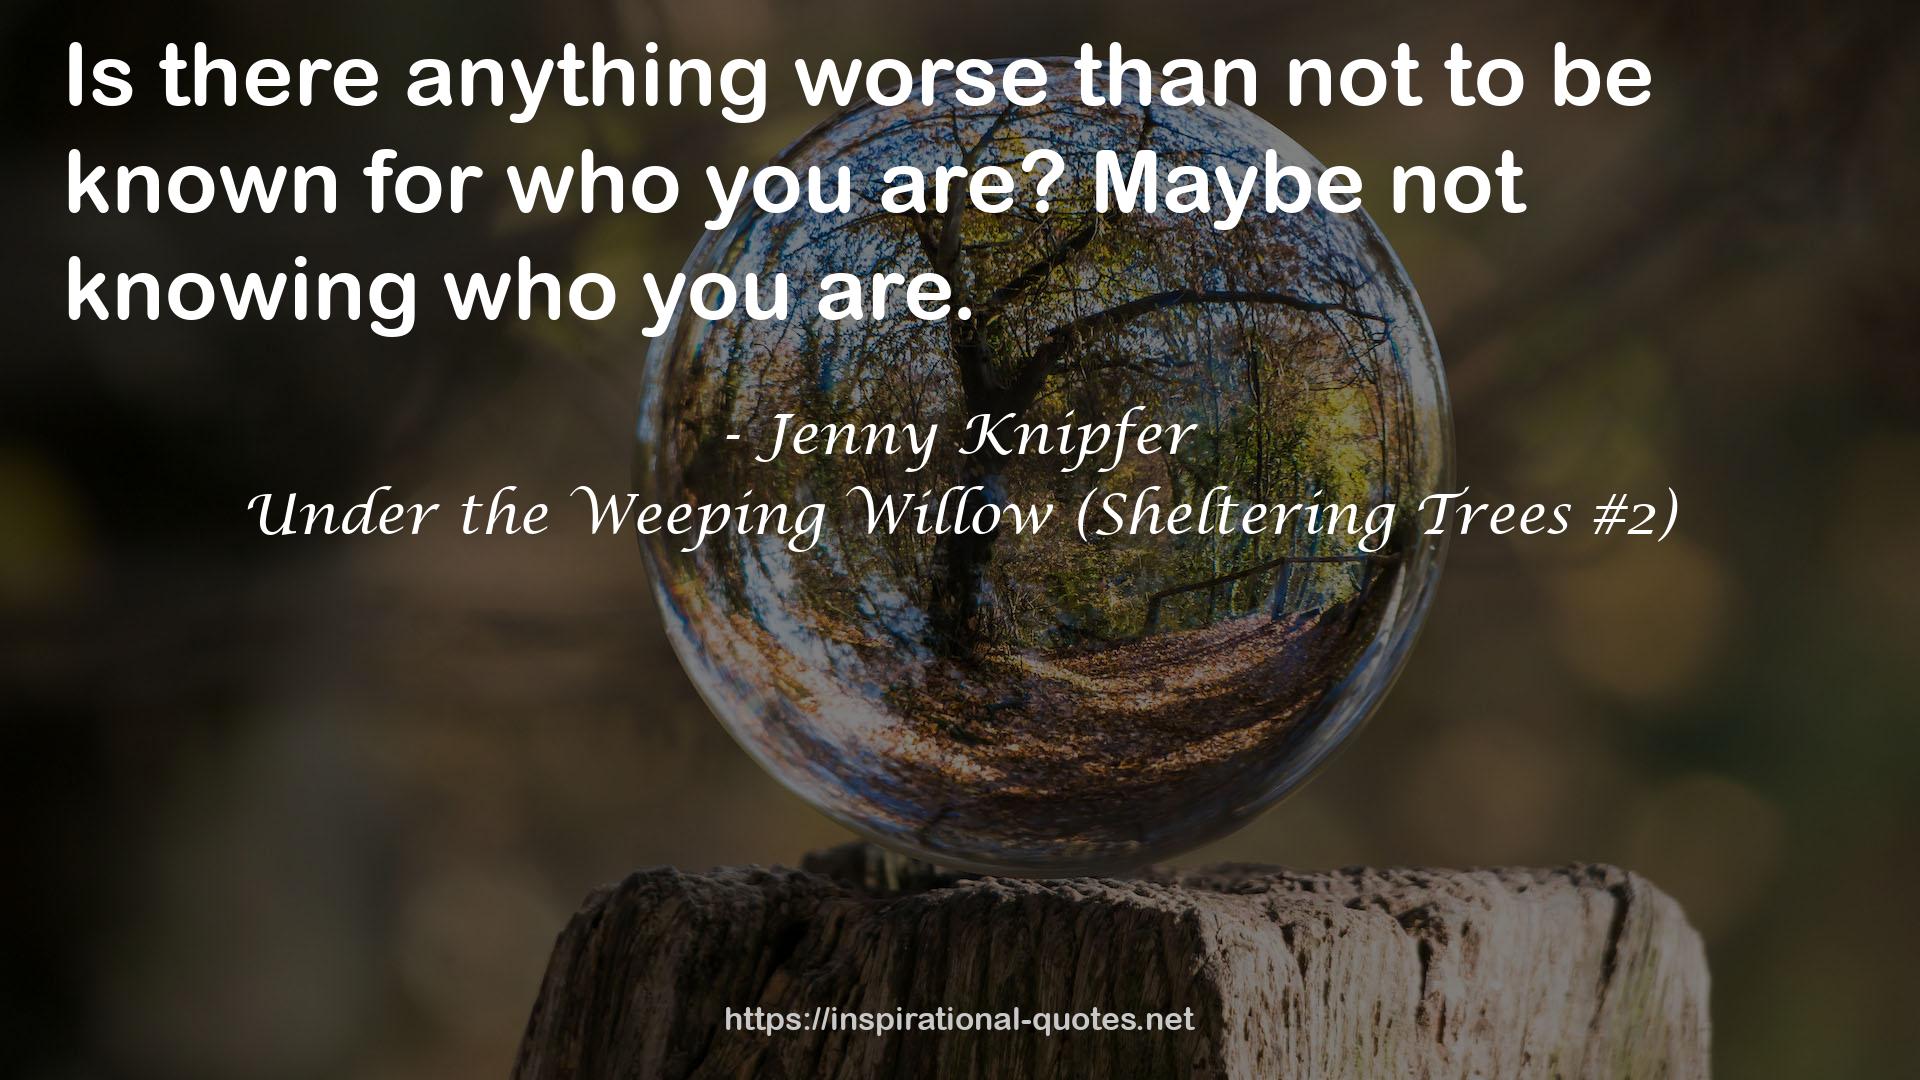 Jenny Knipfer QUOTES